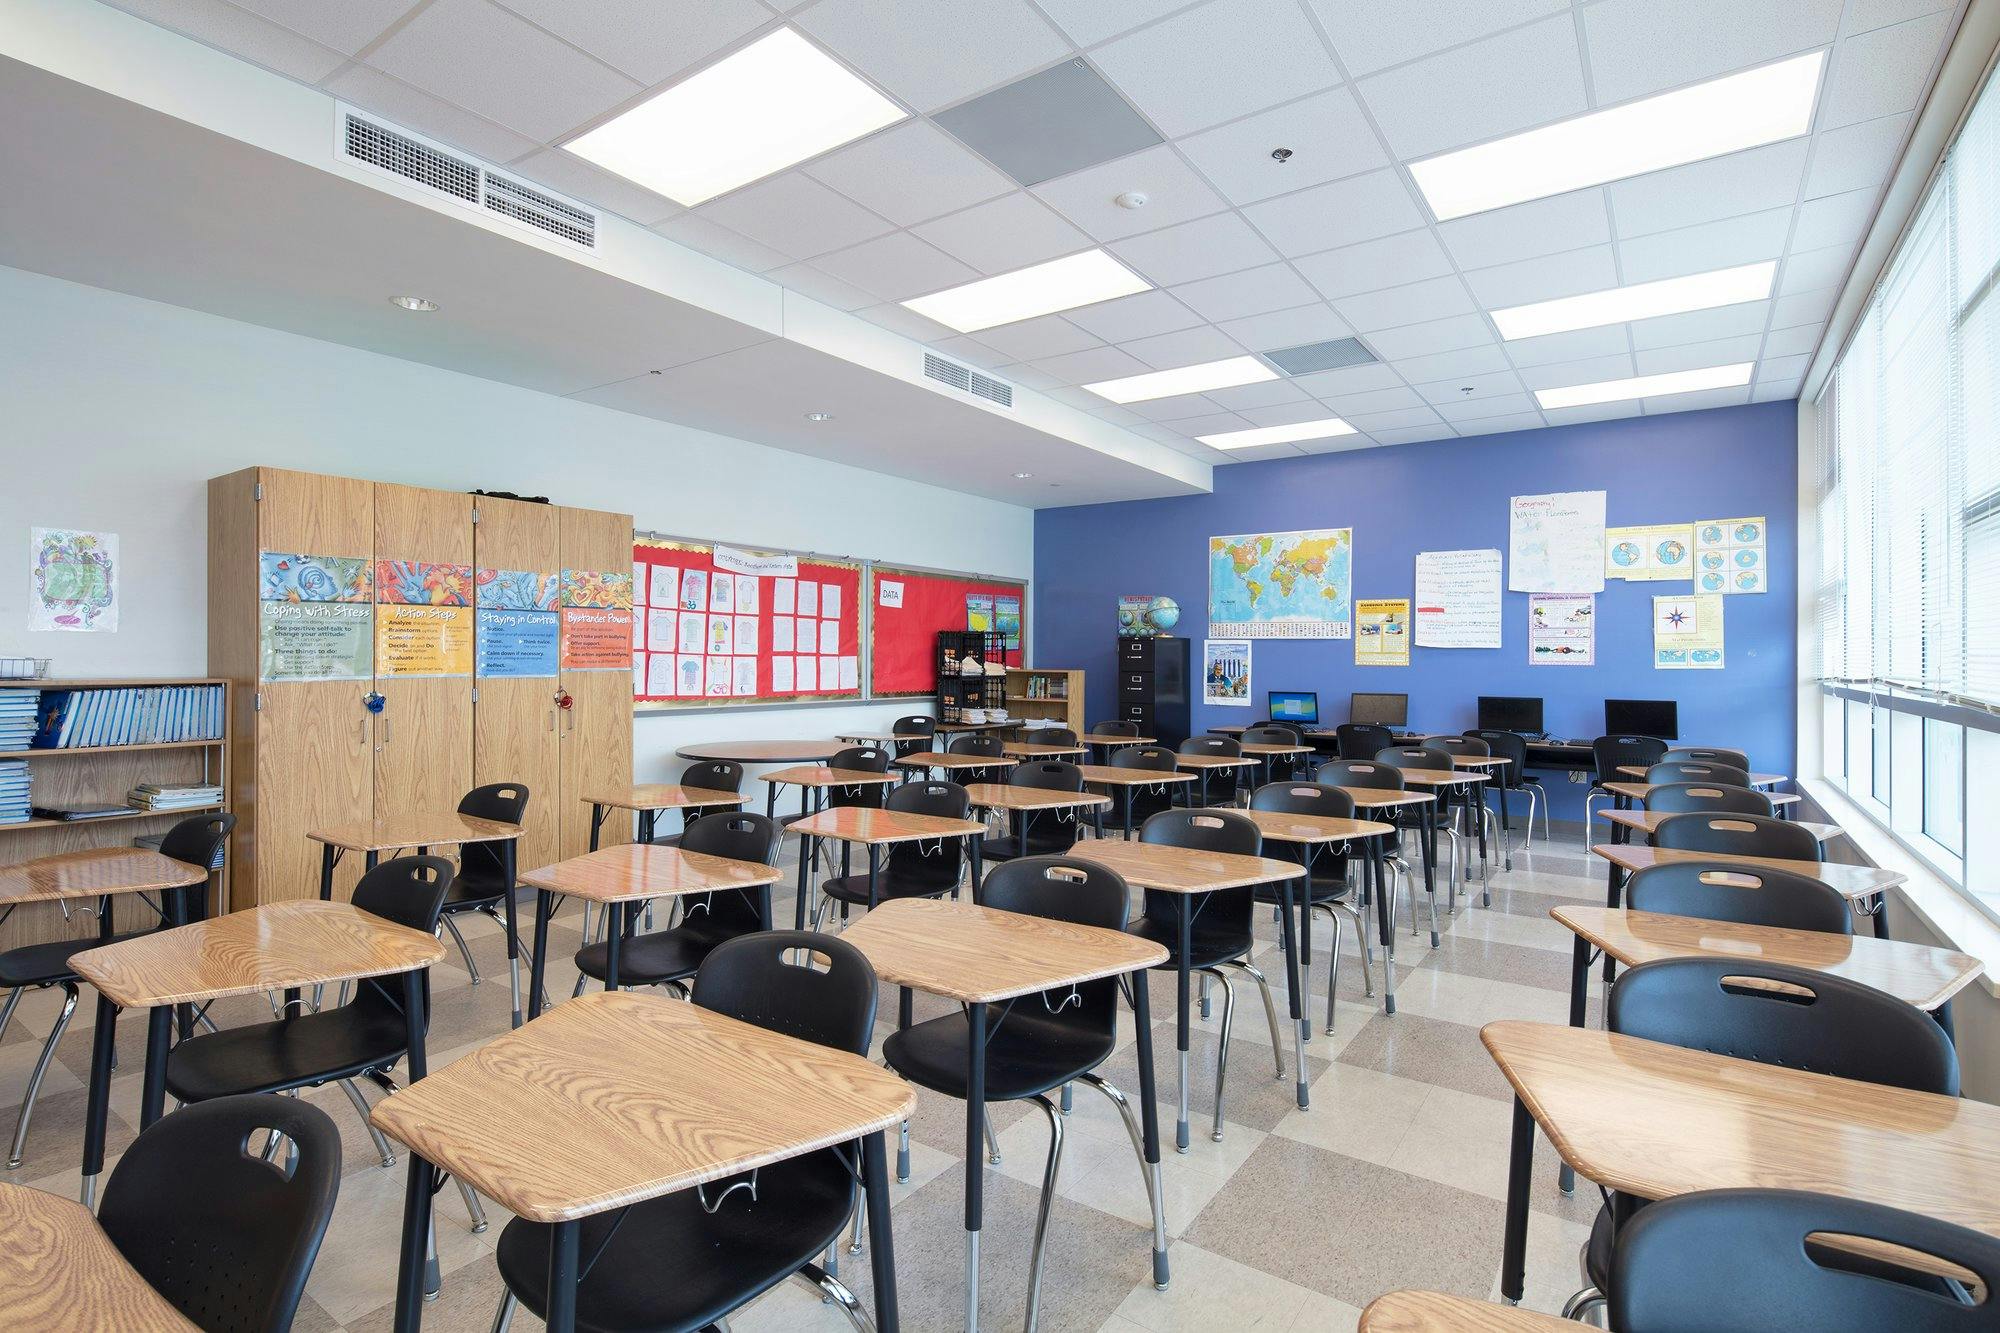 Desks and chairs fill a long classroom with a blue accent wall at the rear.